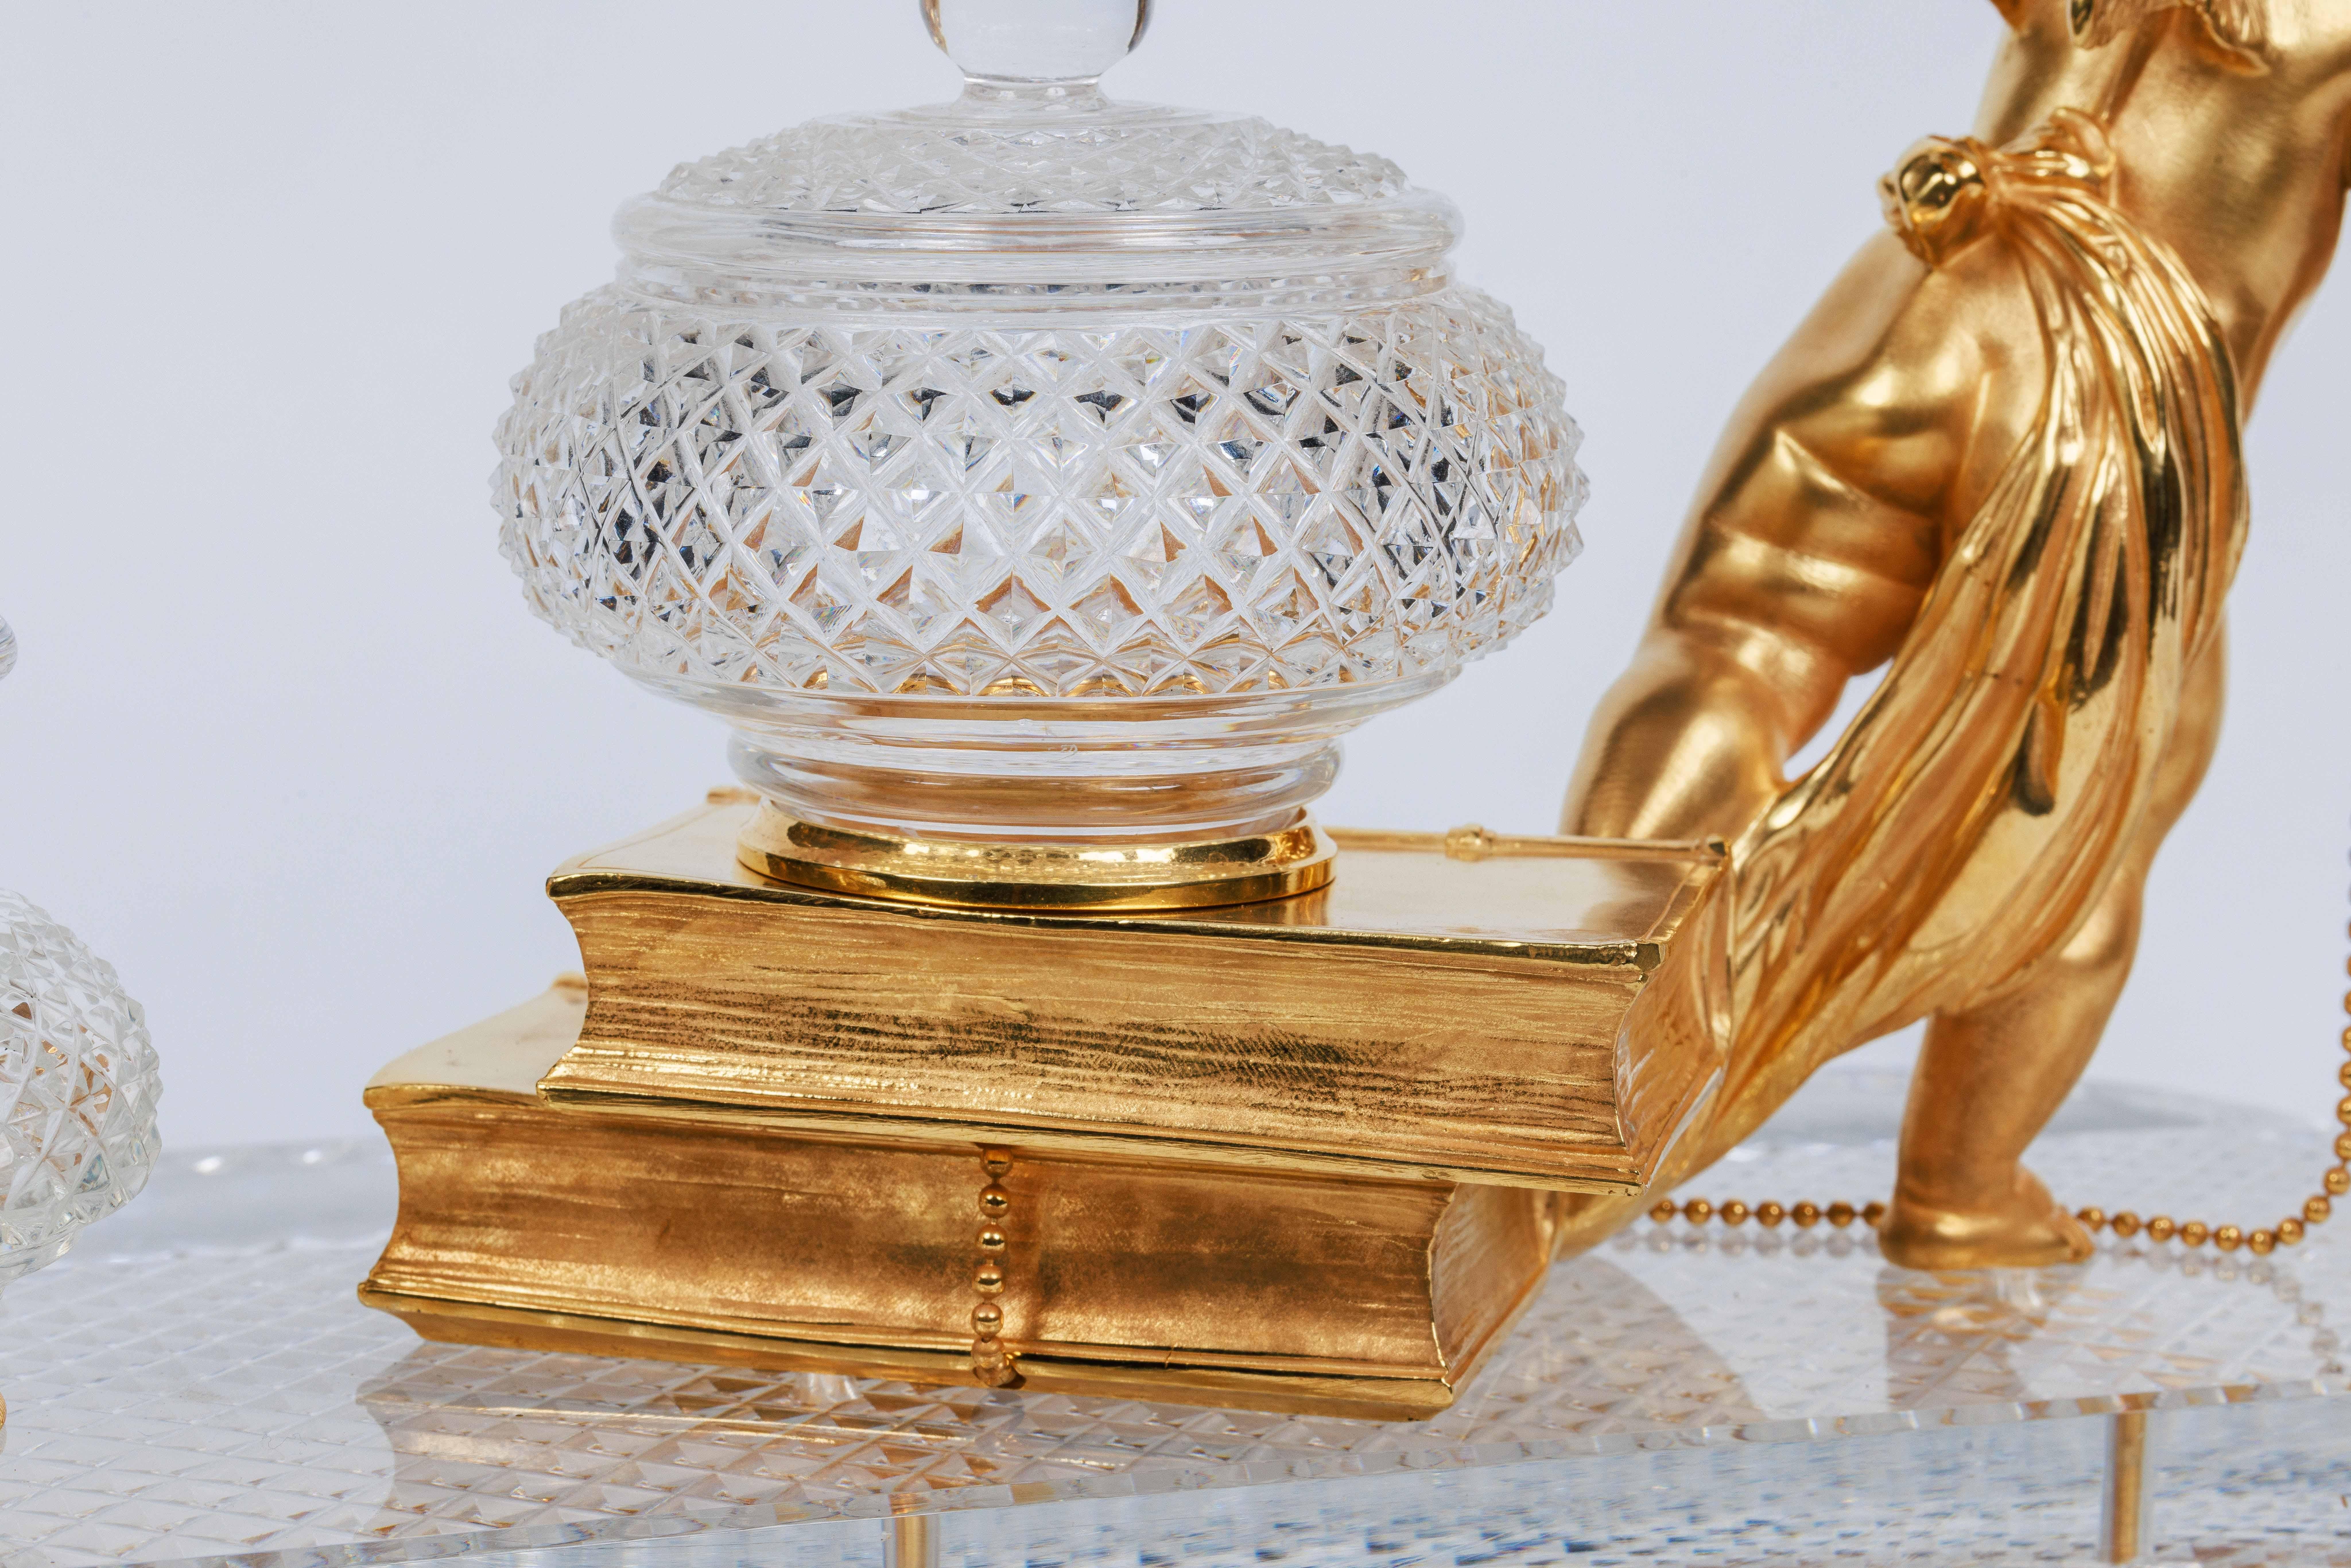 Rare French Ormolu and Diamond-Cut Crystal Figural Inkwell Encrier by Baccarat For Sale 7